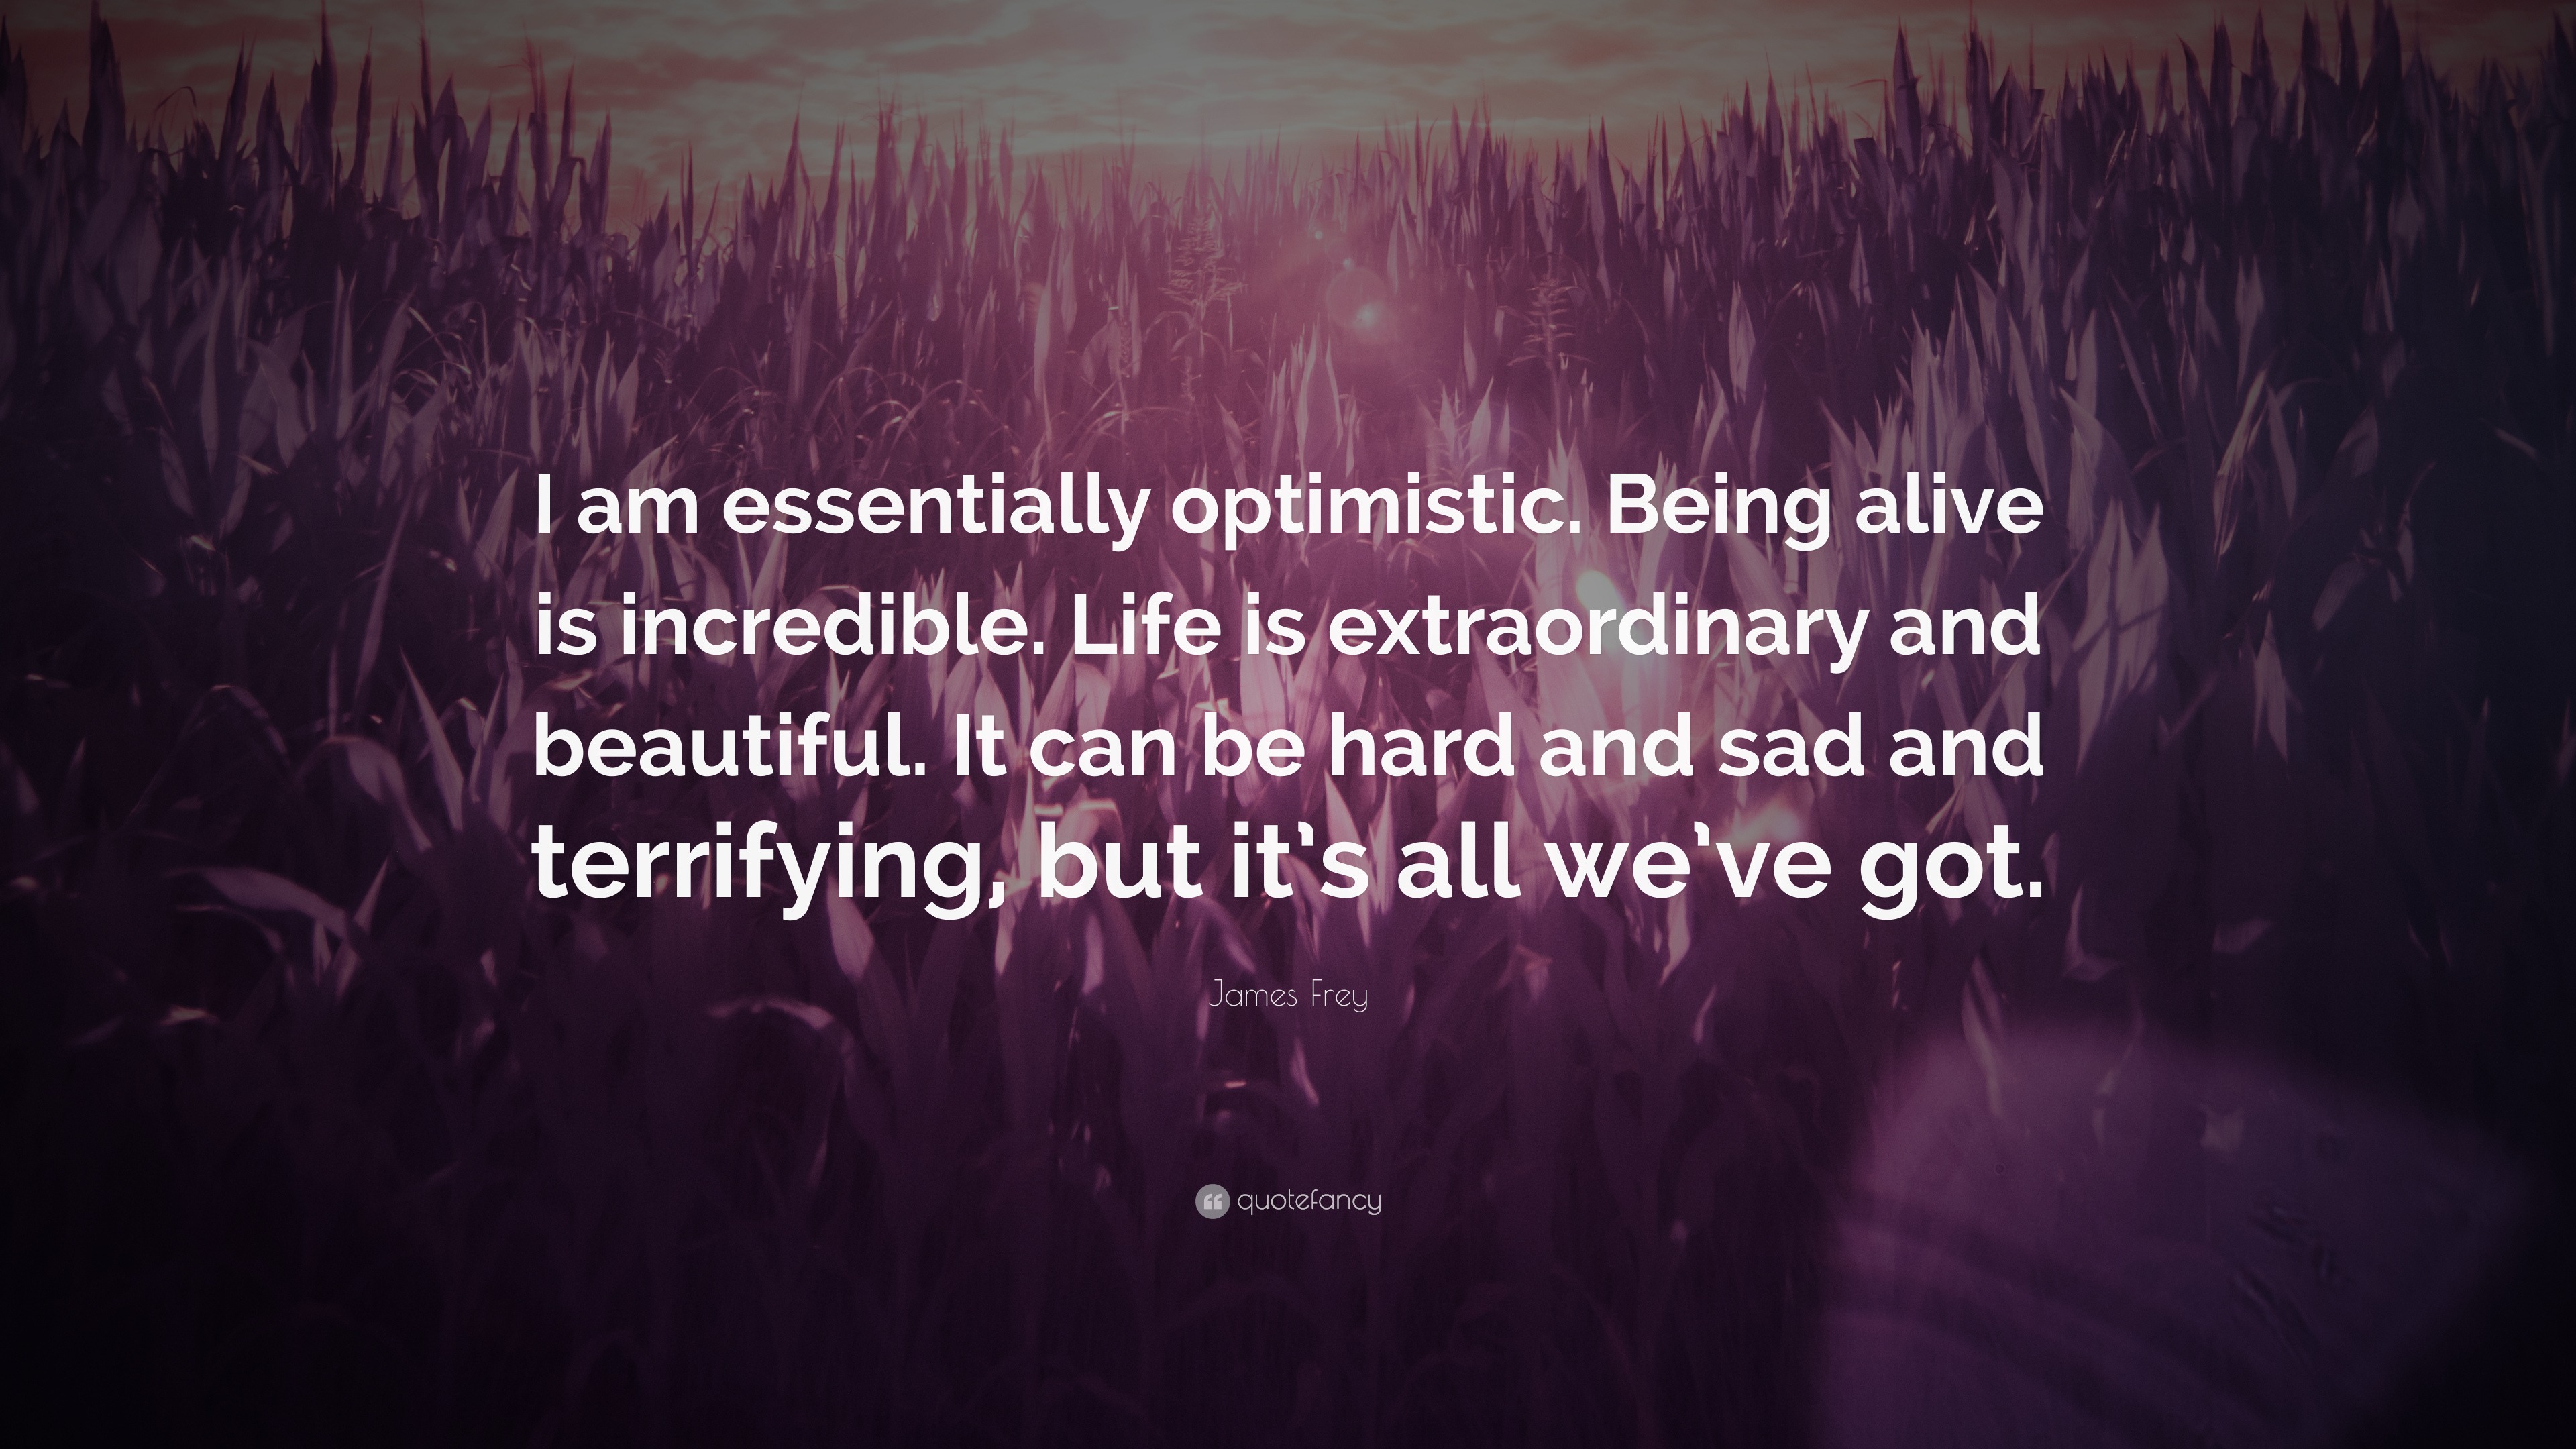 James Frey Quote “I am essentially optimistic Being alive is incredible Life